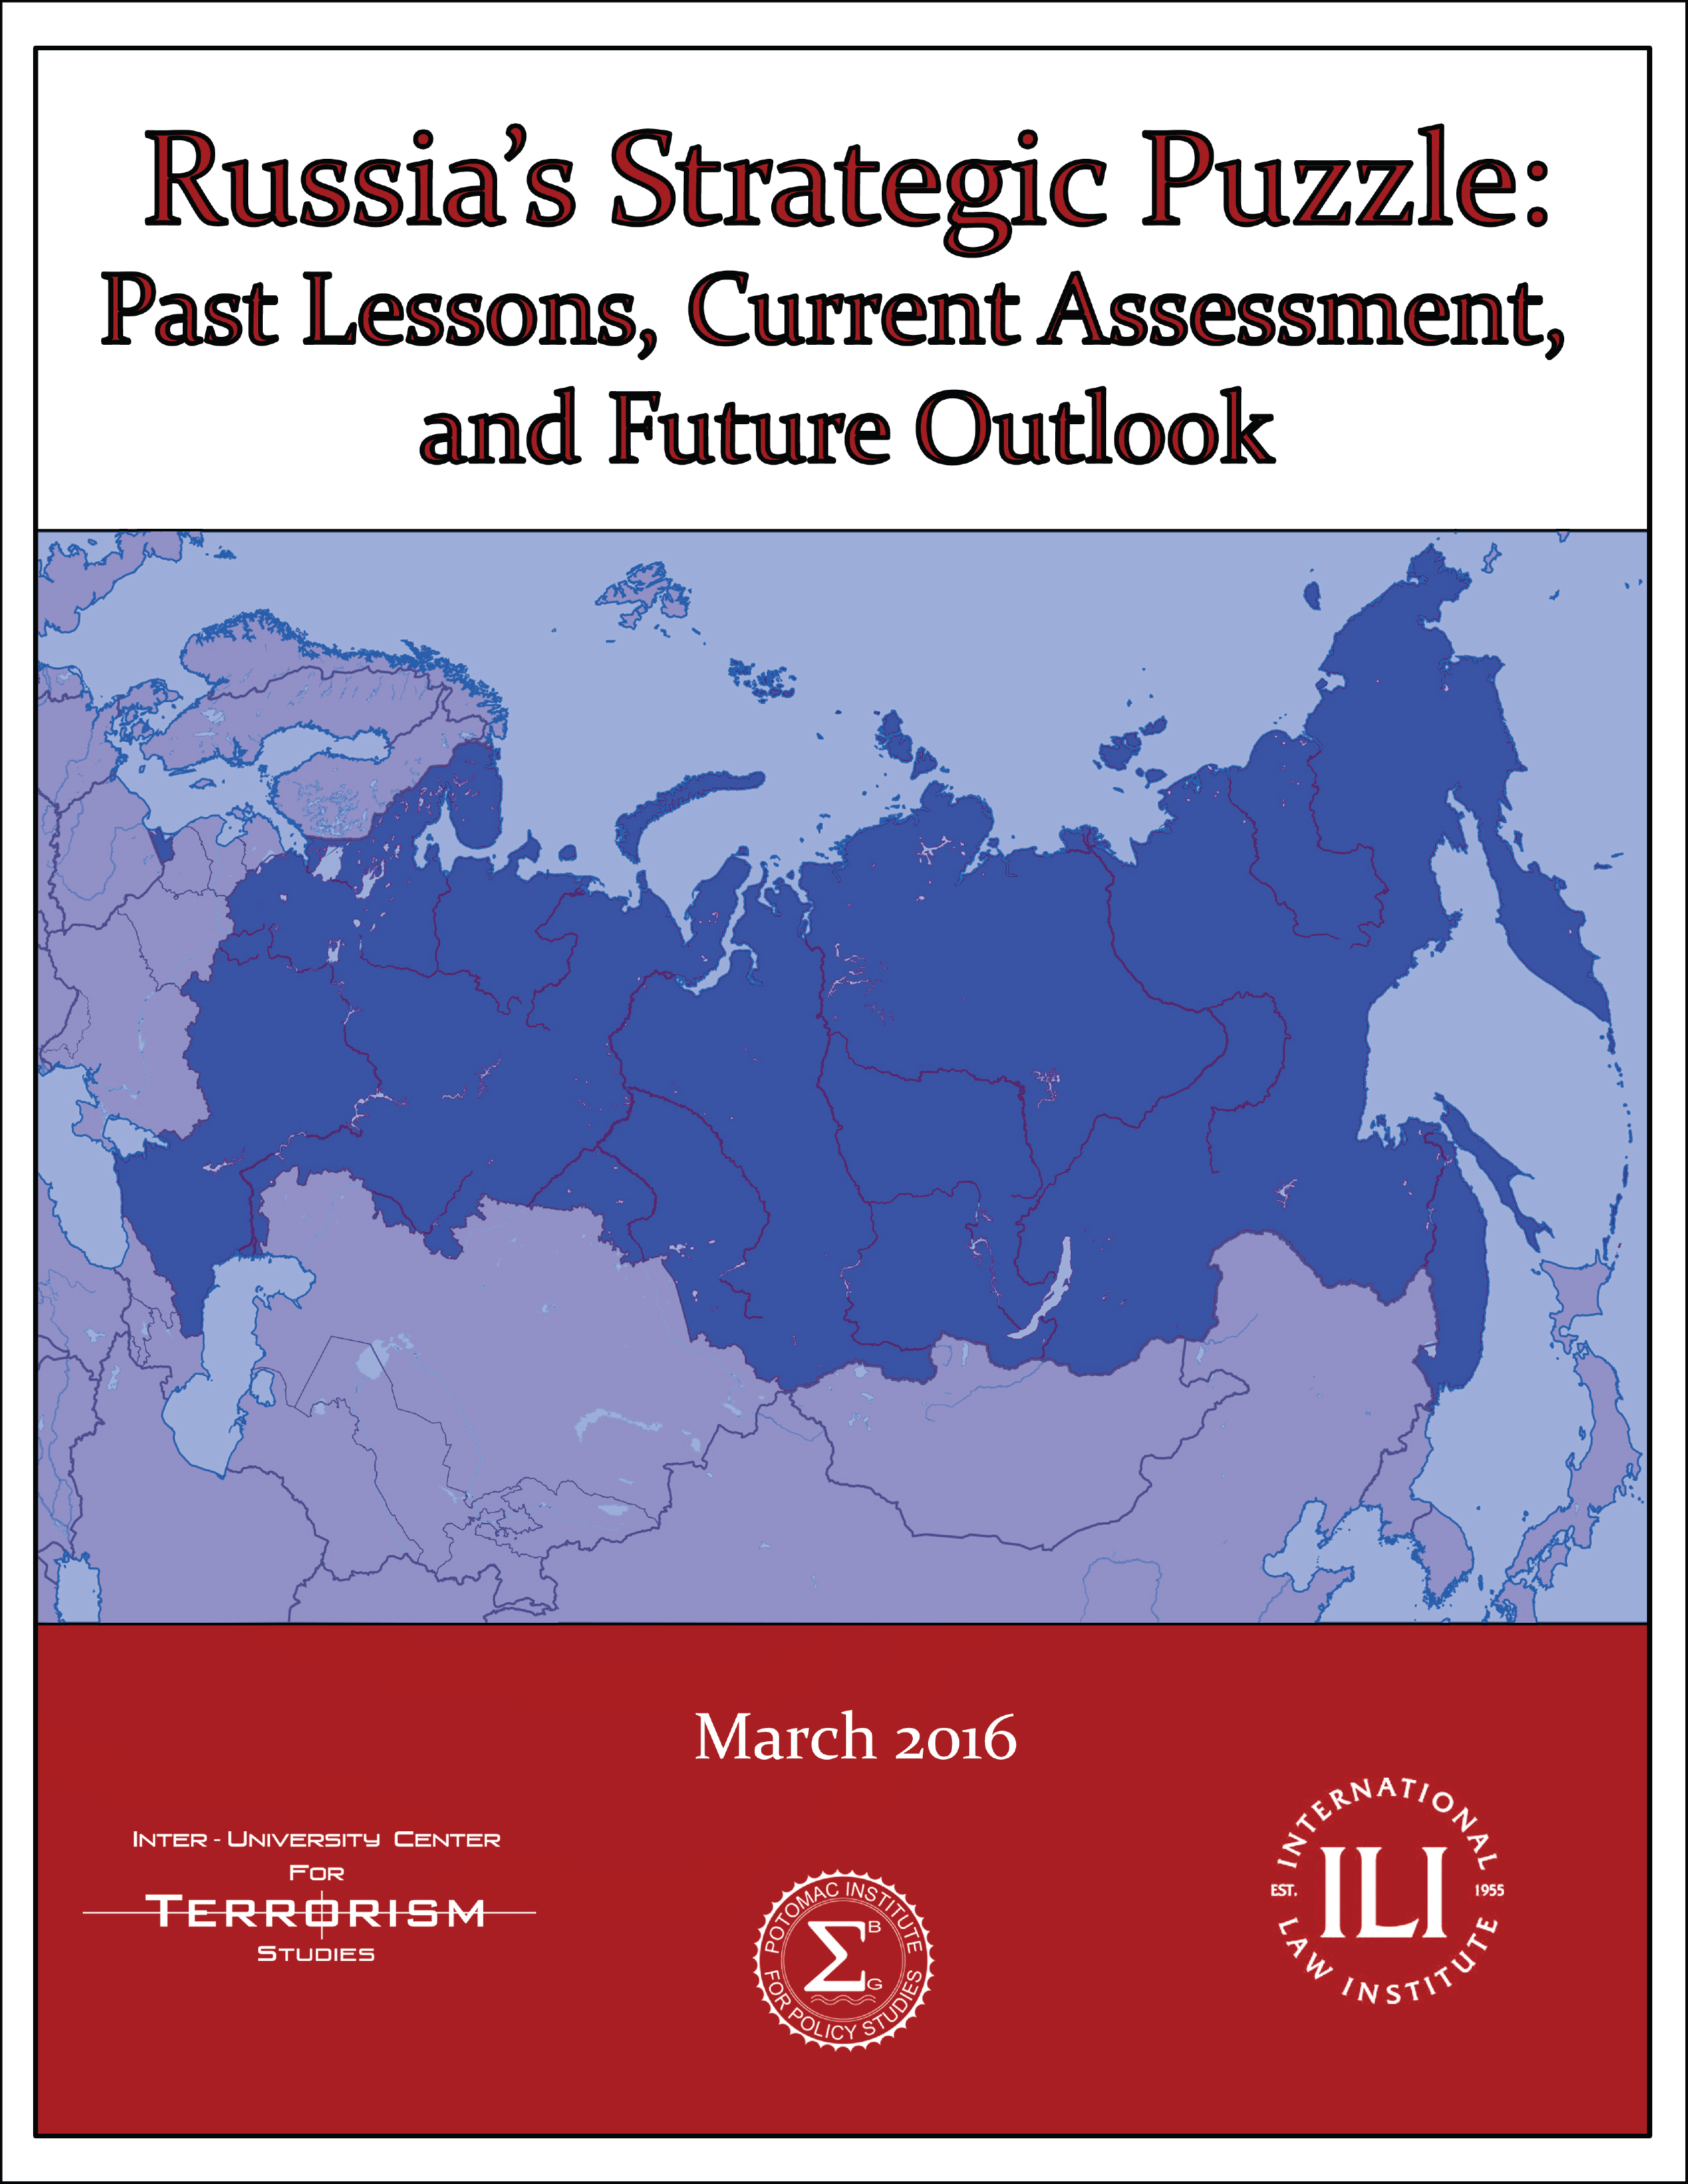 Russia’s Strategic Puzzle: Past Lessons, Current Assessment, and Future Outlook